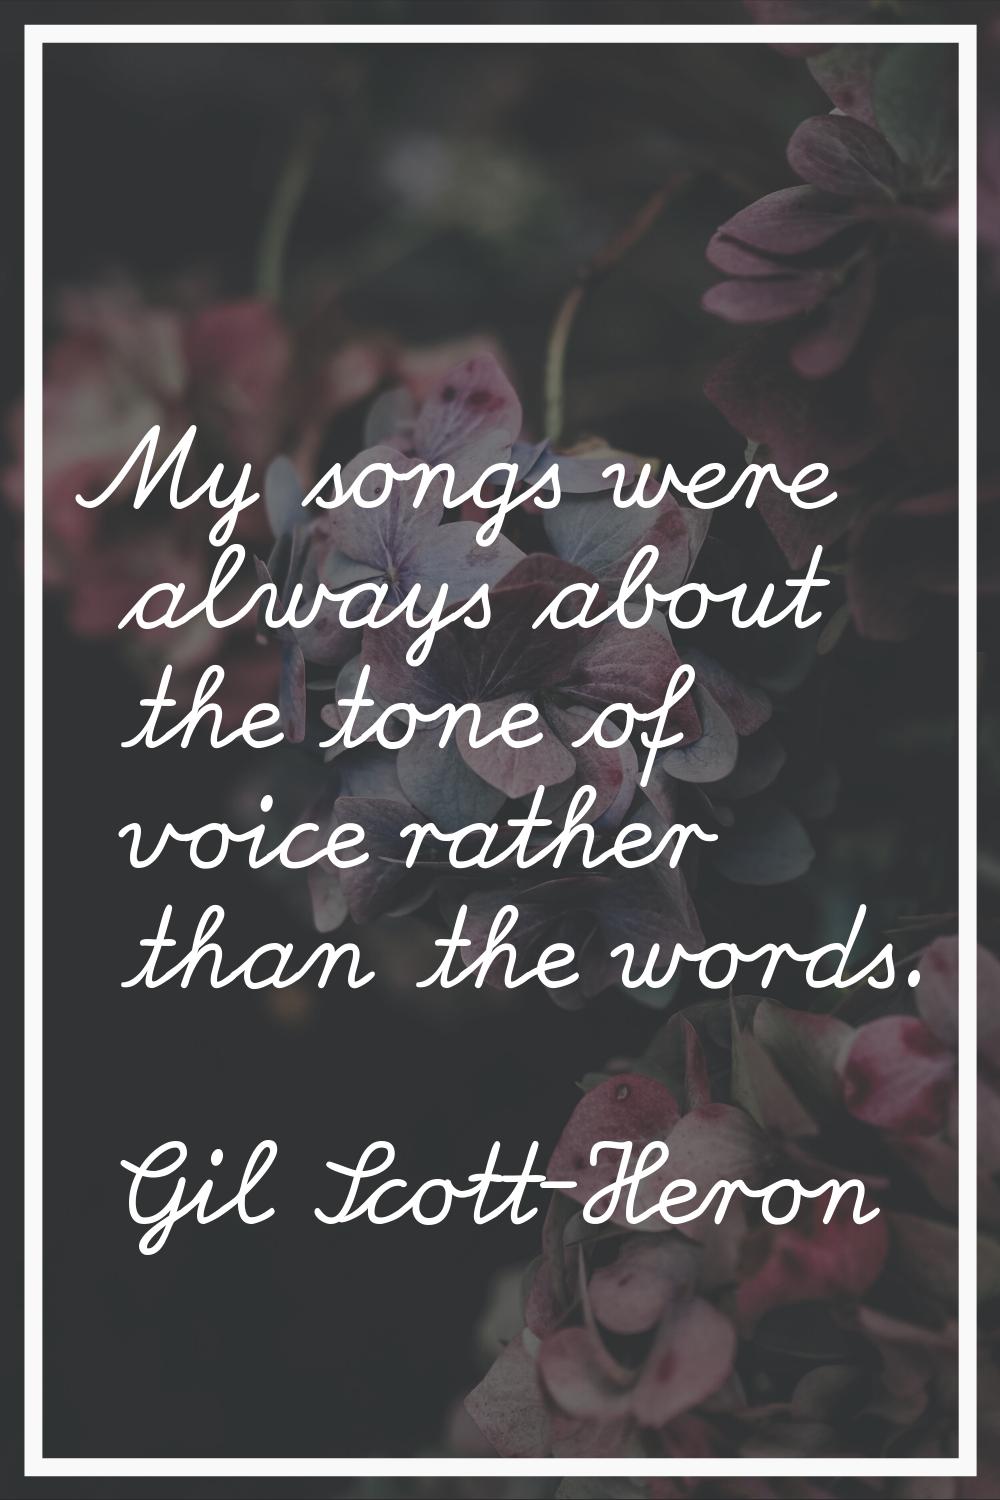 My songs were always about the tone of voice rather than the words.